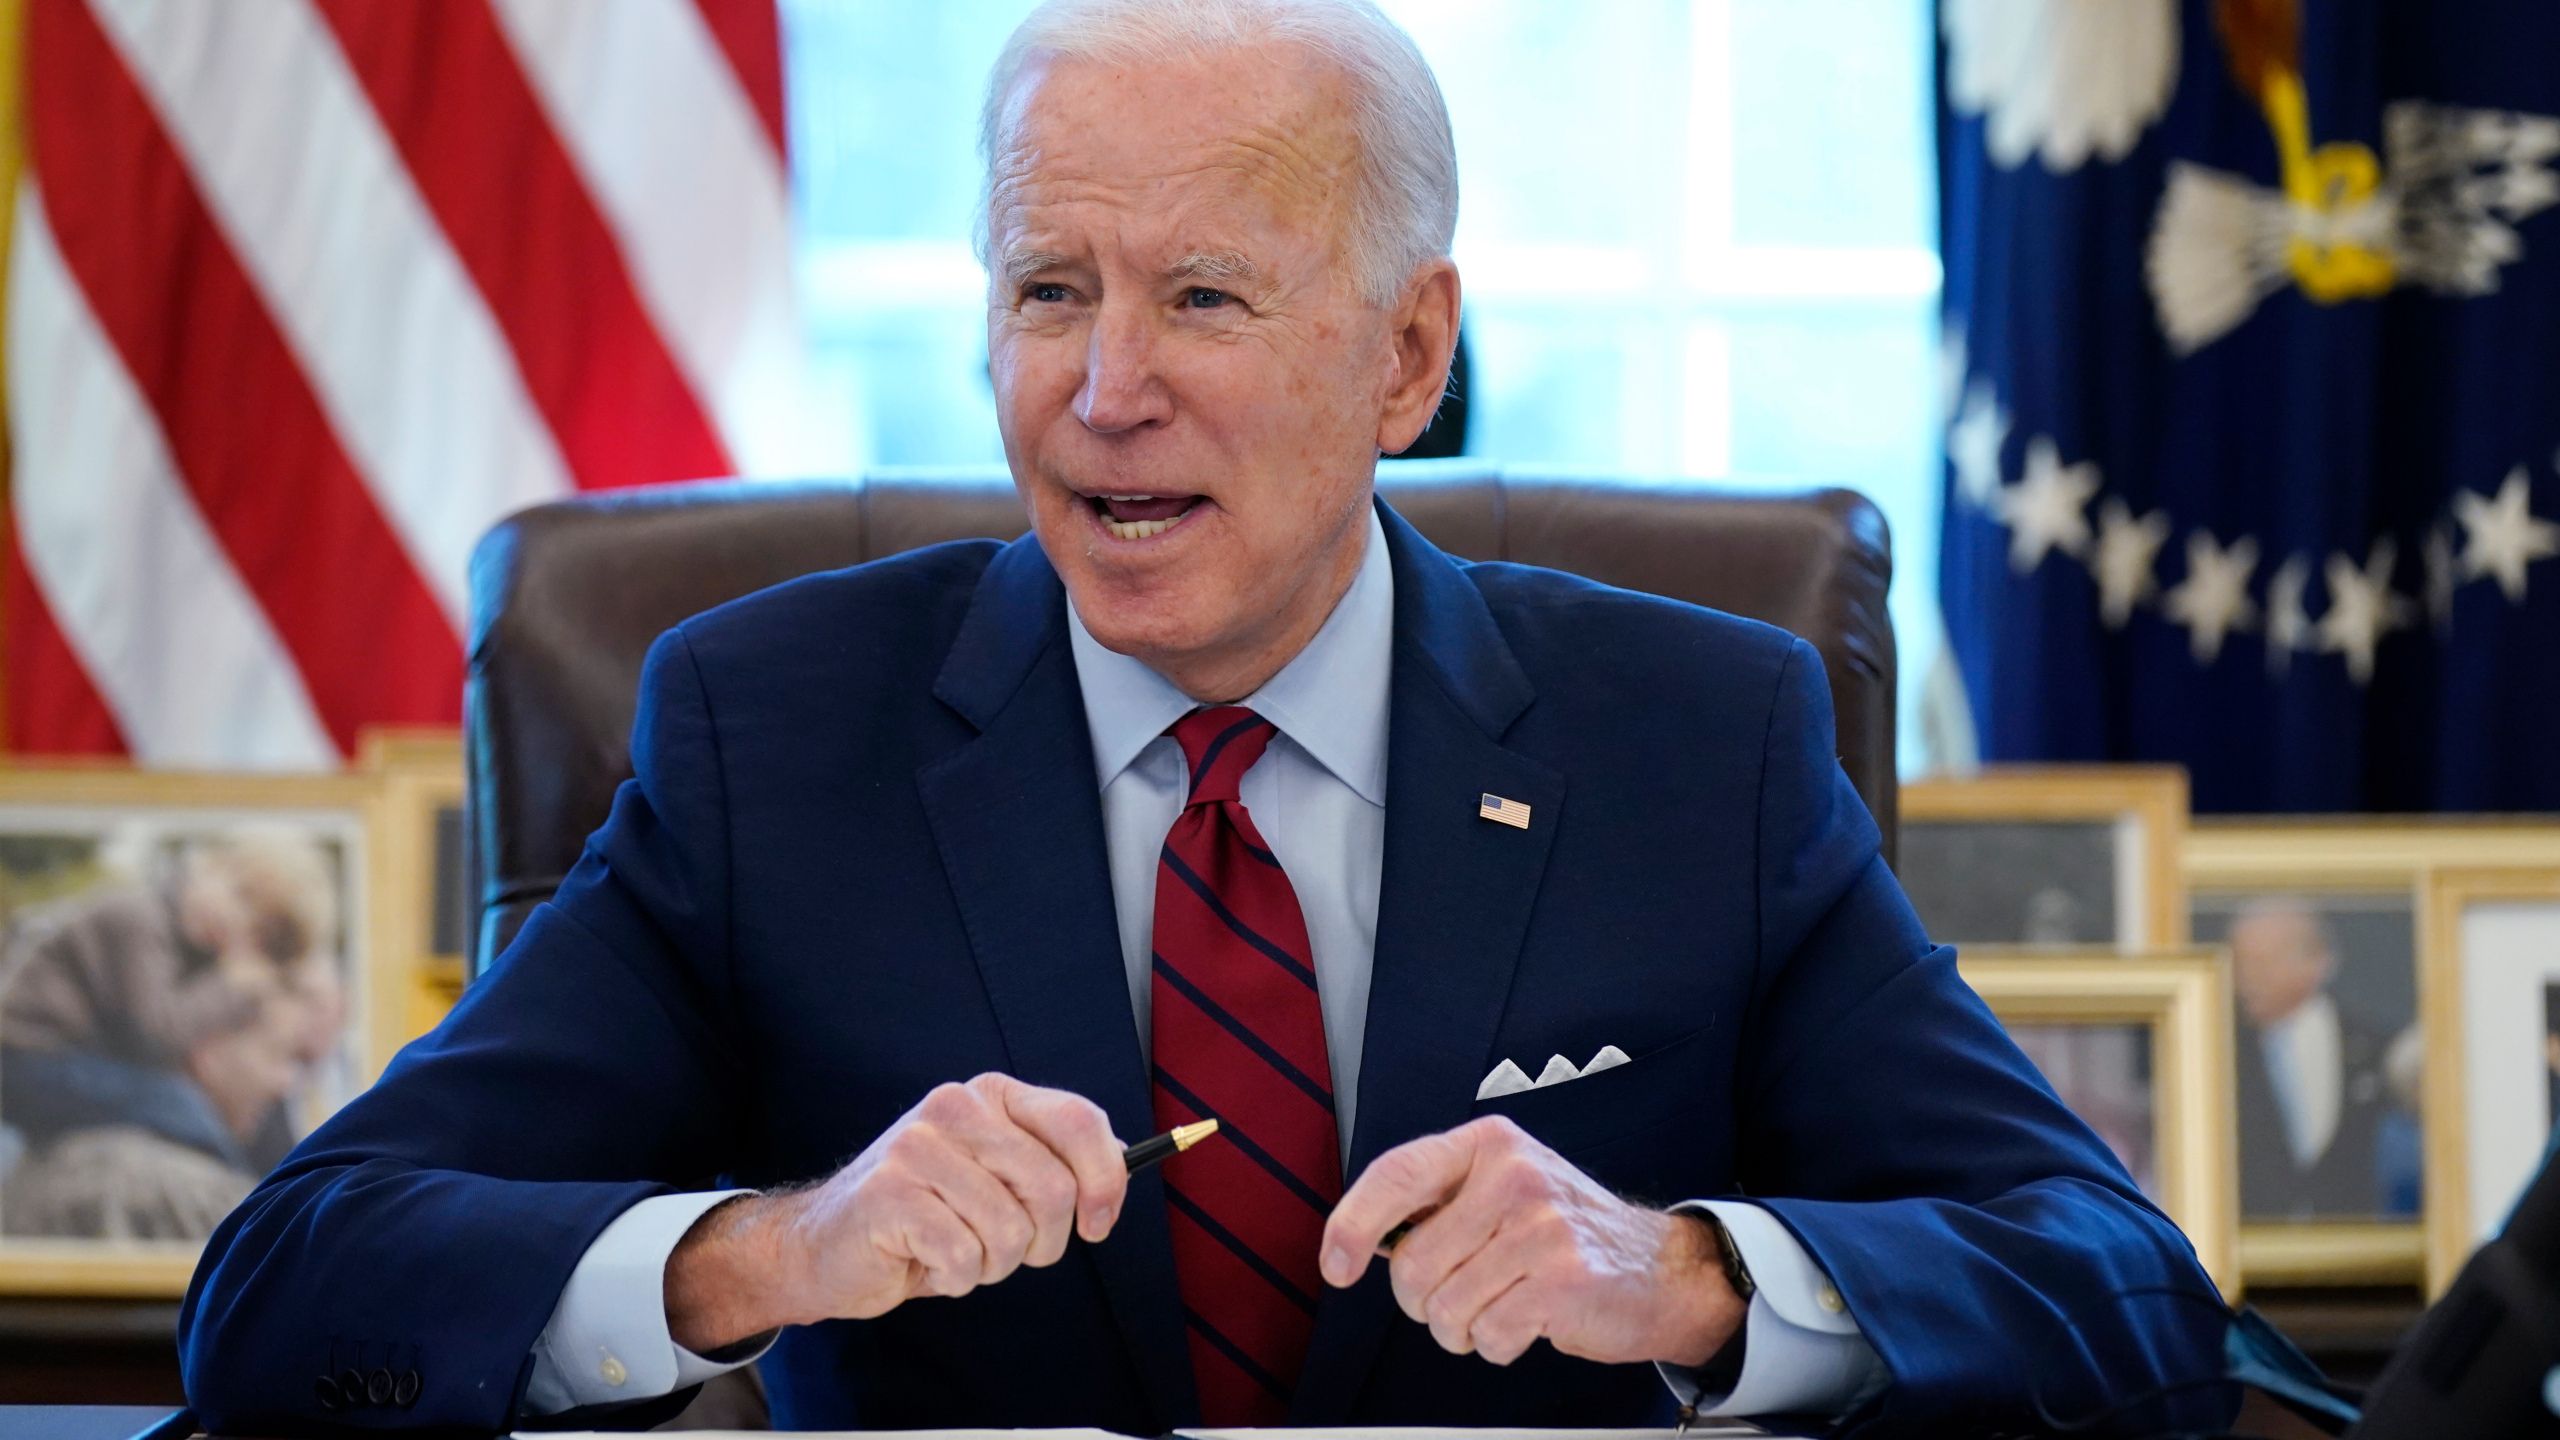 Biden faces questions about commitment to minimum wage hike